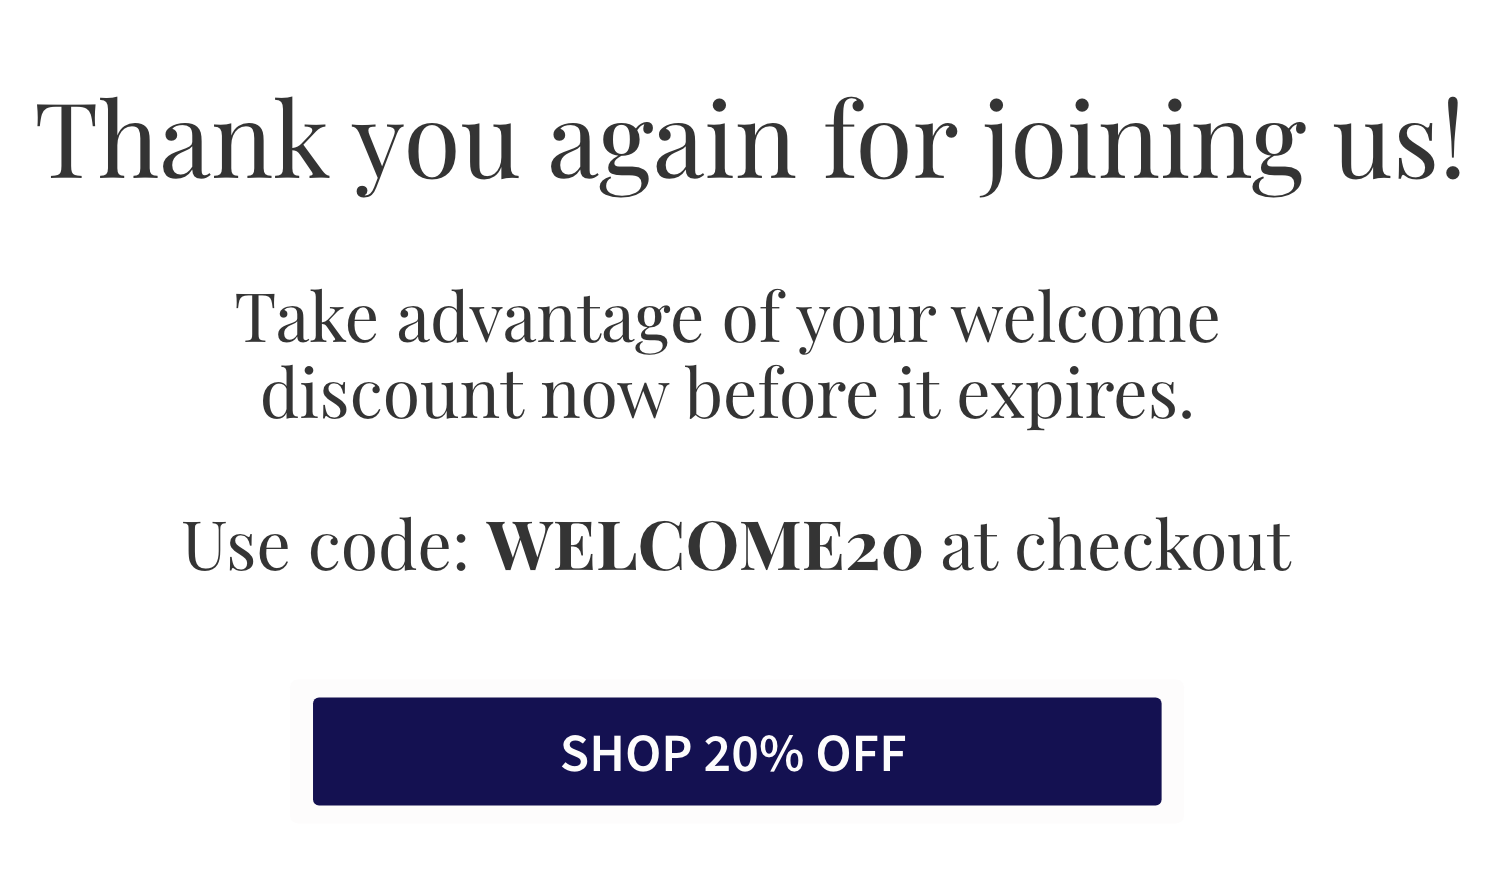 use code welcome20 at checkout for 20% off discount